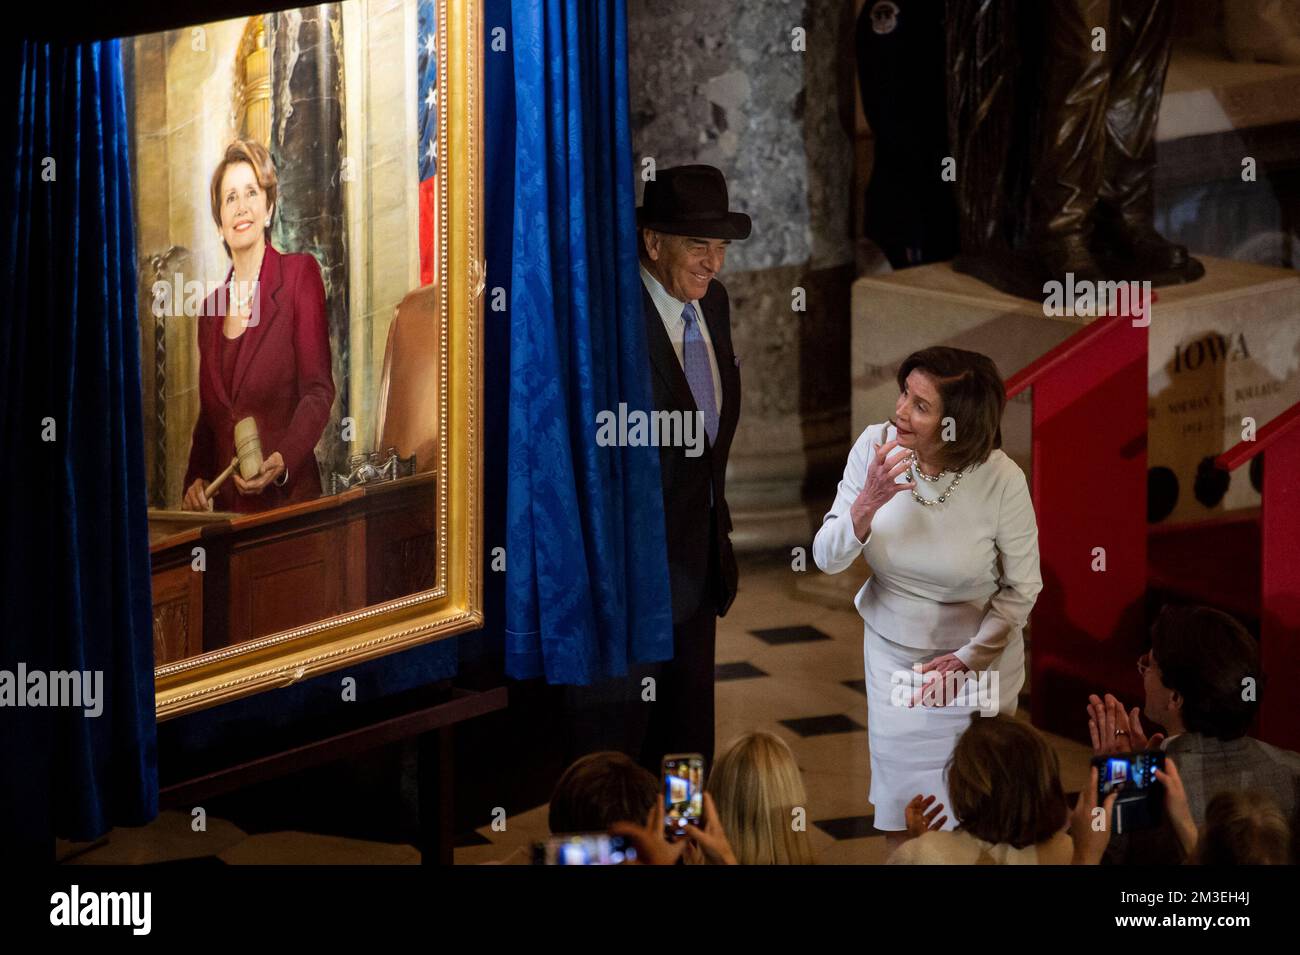 Speaker of the United States House of Representatives Nancy Pelosi (Democrat of California) is joined by her husband Paul Pelosi during a ceremony to unveil her official portrait in Statuary Hall at the US Capitol in Washington, DC, USA, Wednesday, December 14, 2022. Photo by Rod Lamkey/CNP/ABACAPRESS.COM Stock Photo